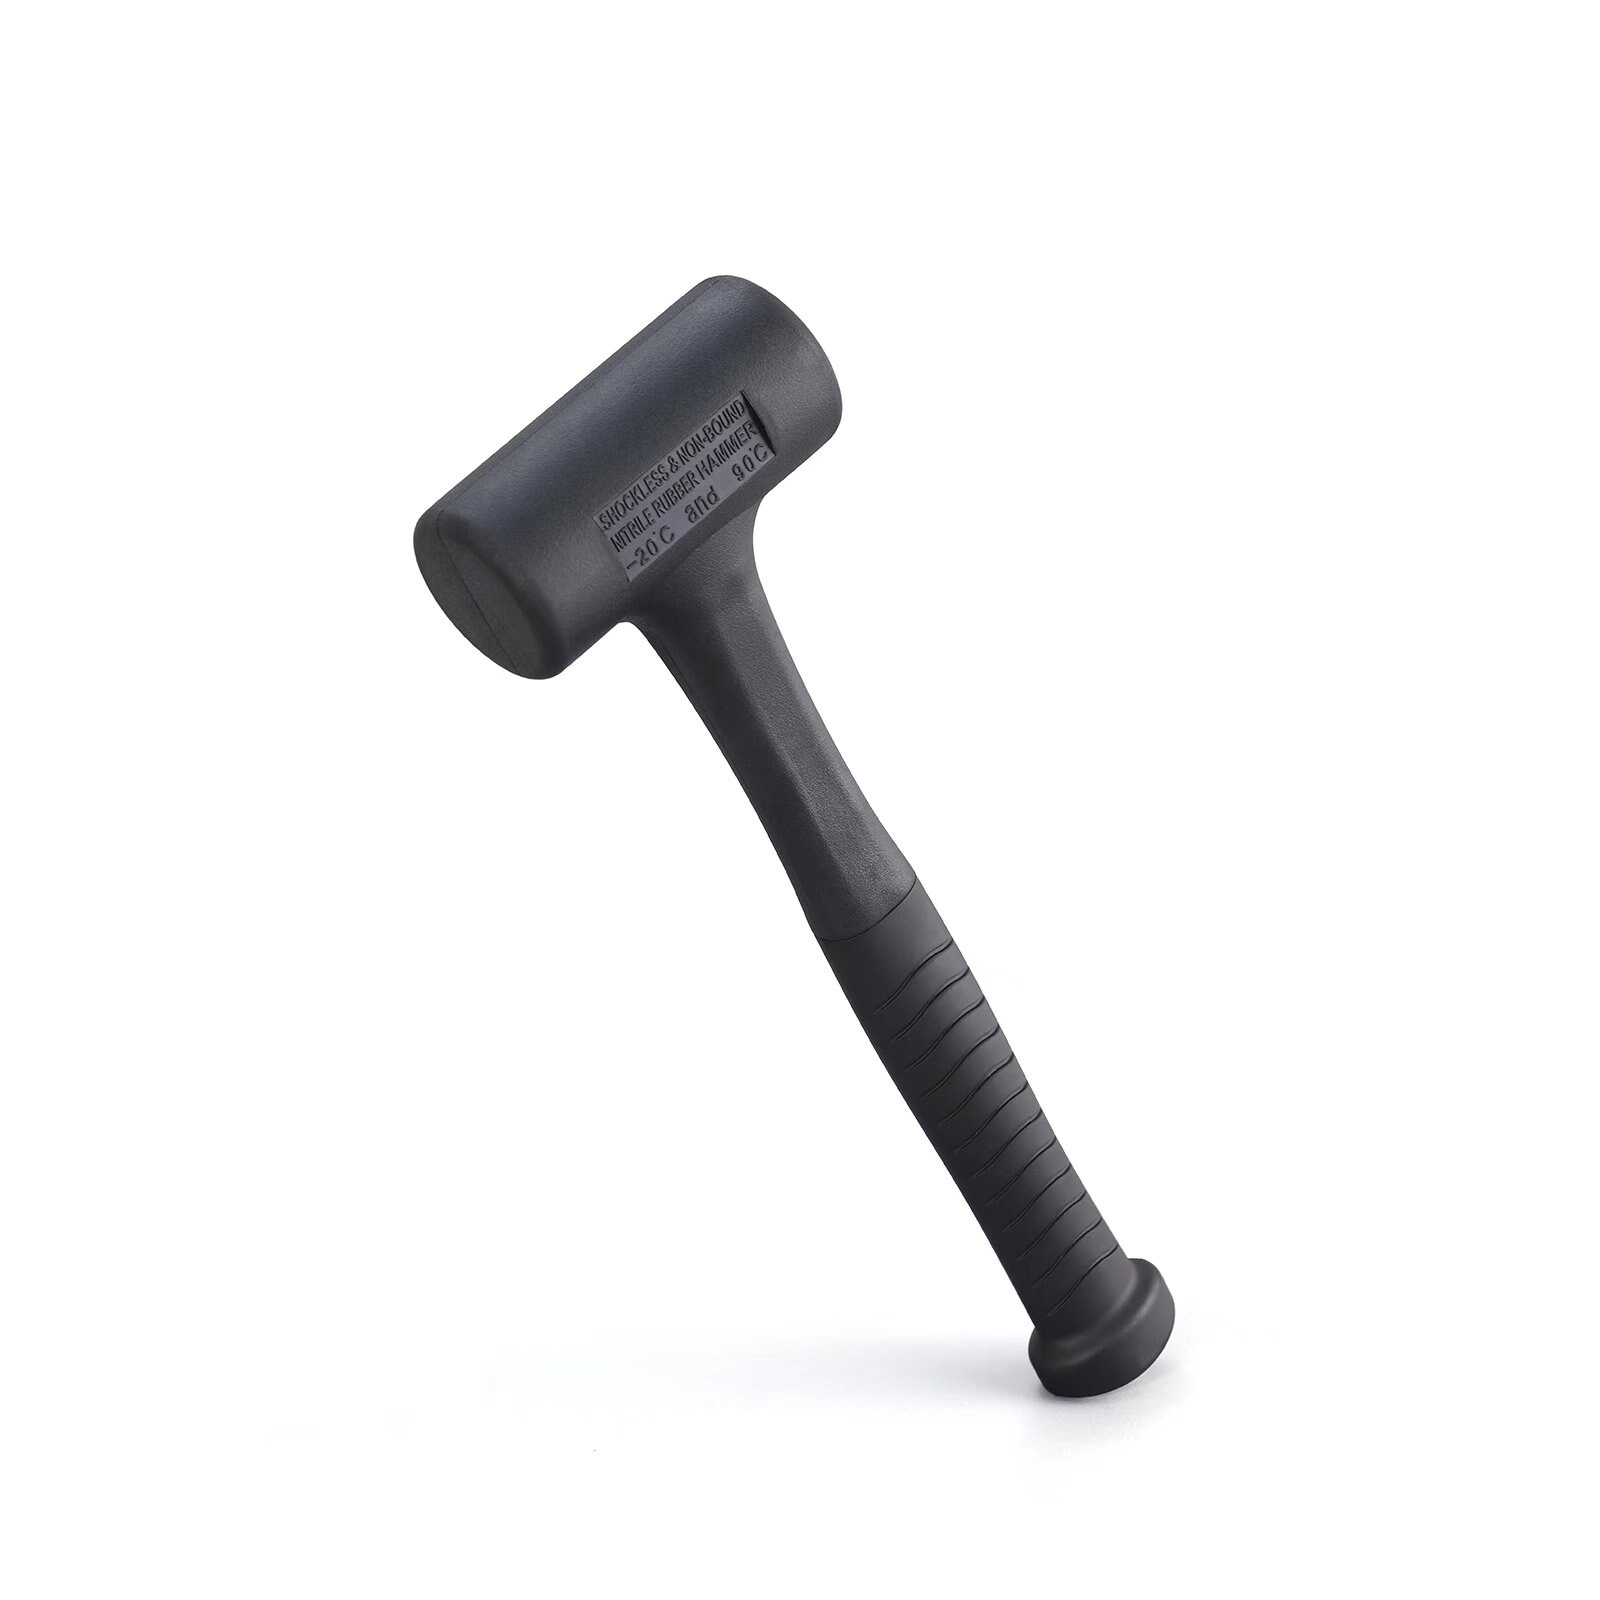 Morden Fort 1lbs Rubber Dead Blow Hammer, Professional Mallet Tool Black - N/A